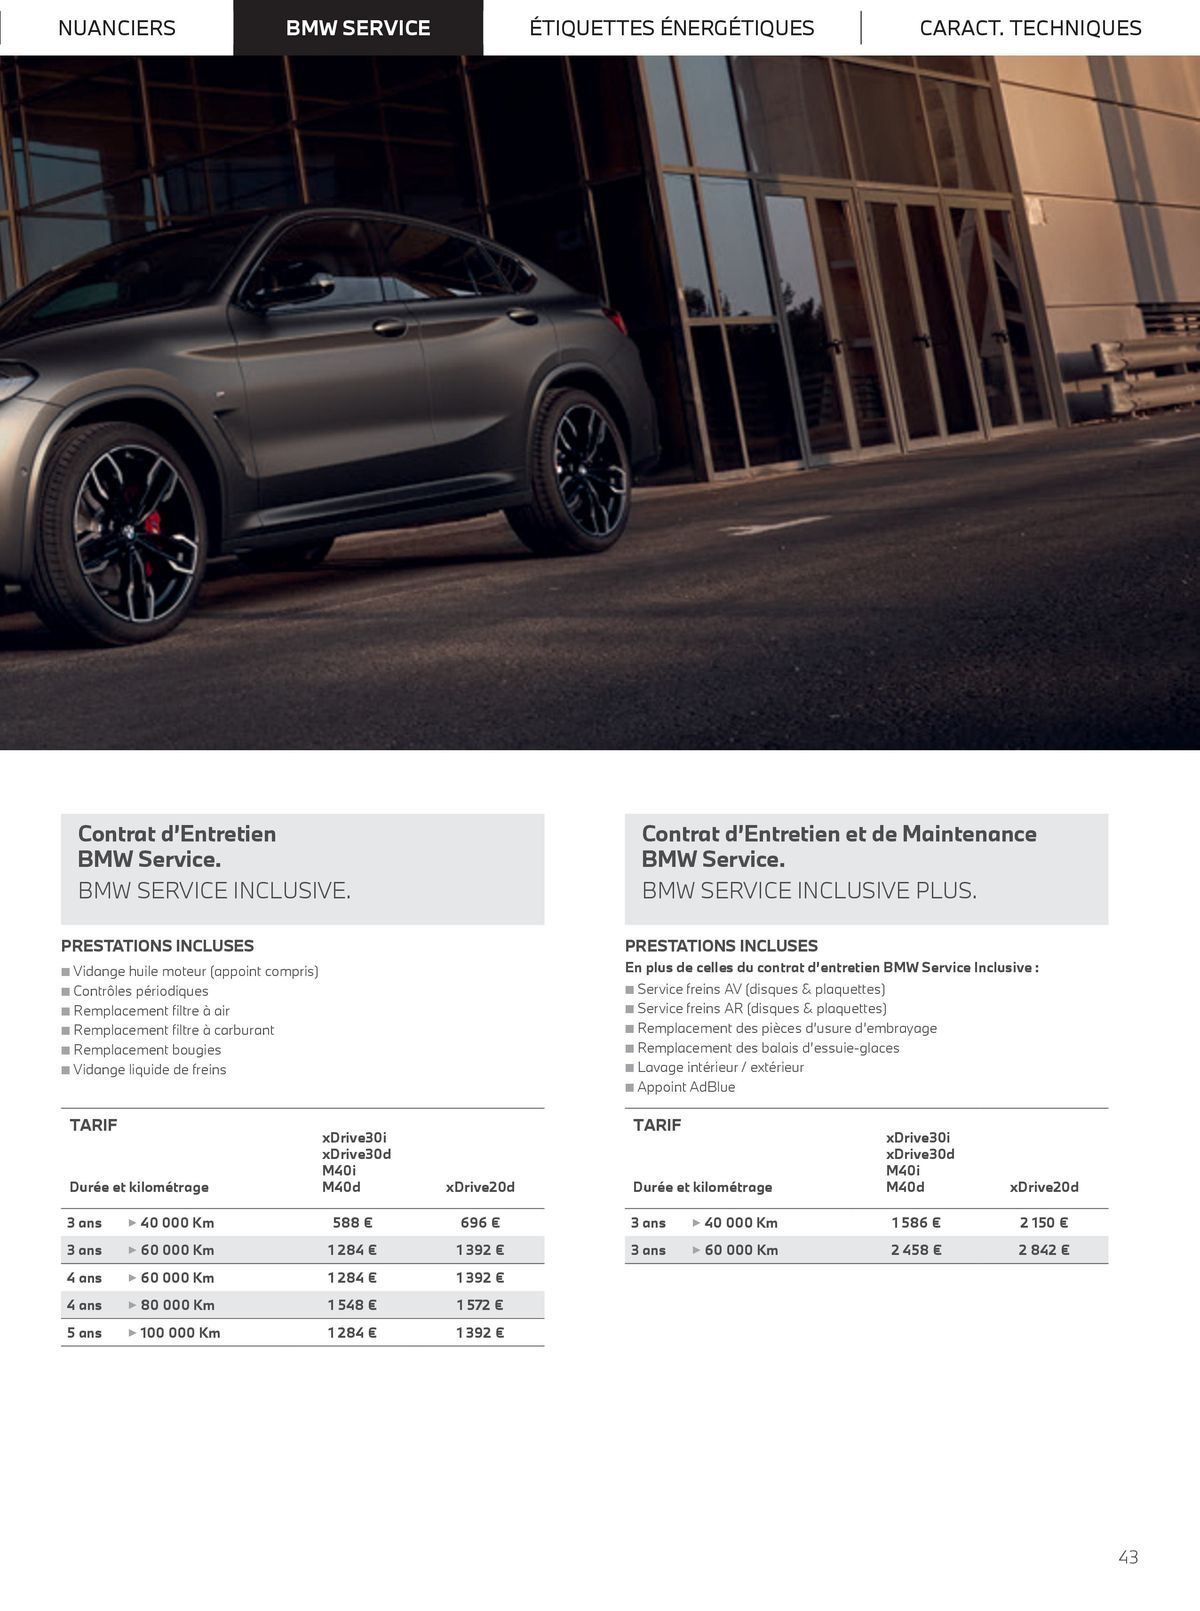 Catalogue The new X4, page 00043